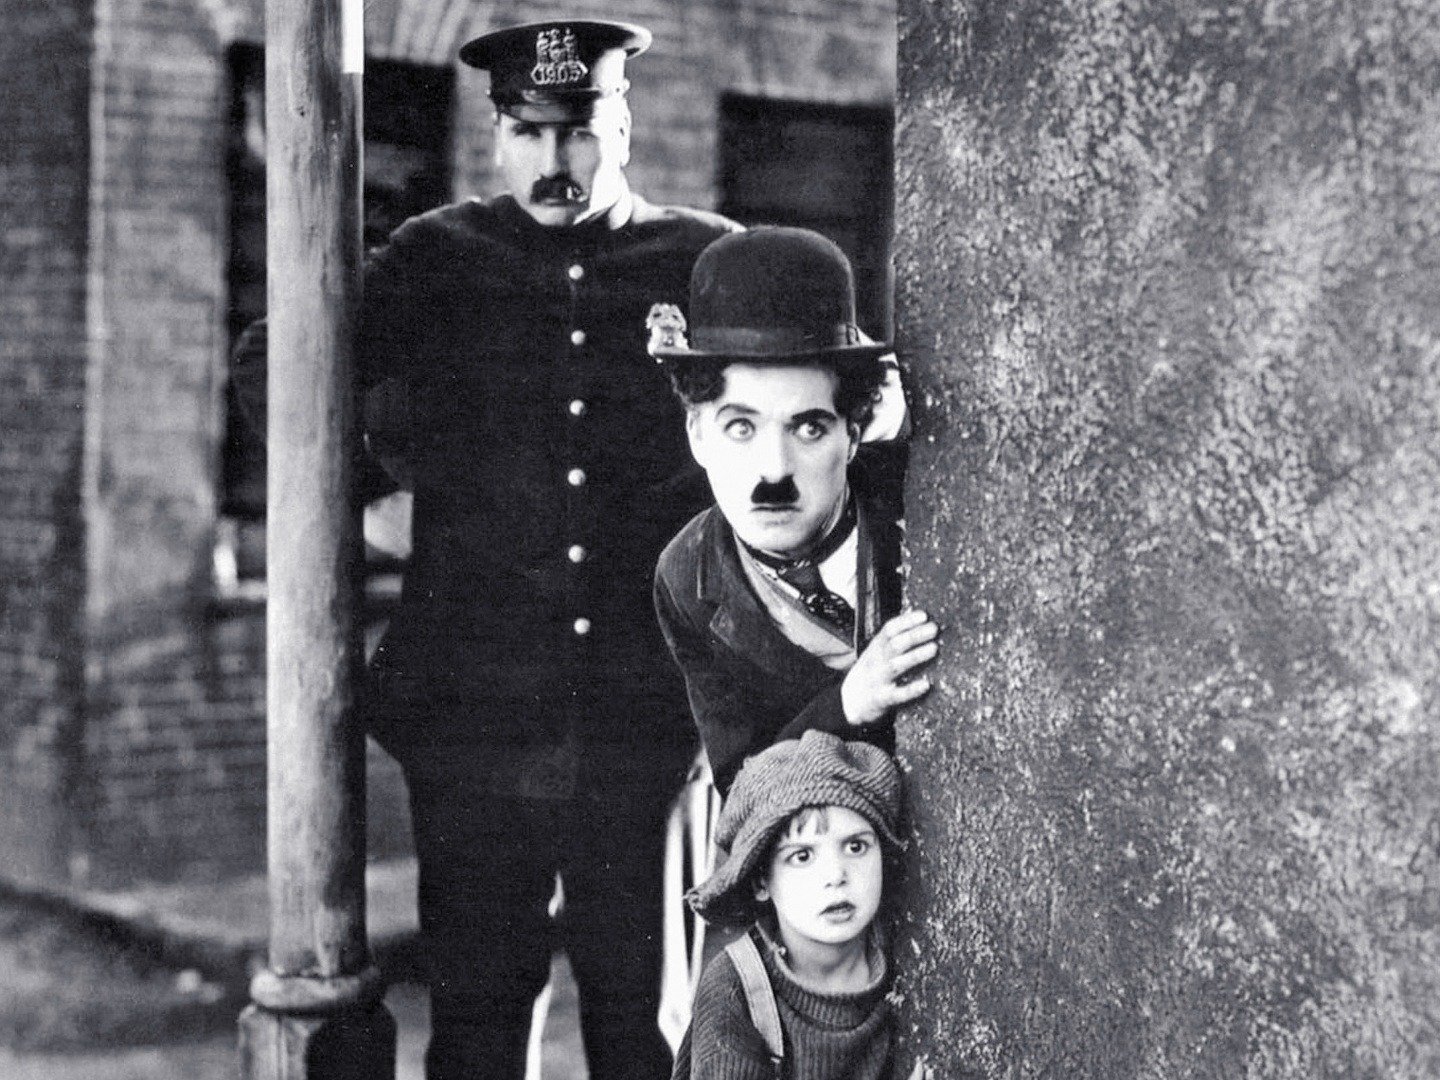 black and white photo of charlie chaplin peering round a wall corner with a small child, a police man stands in the background as part of the angel field festival